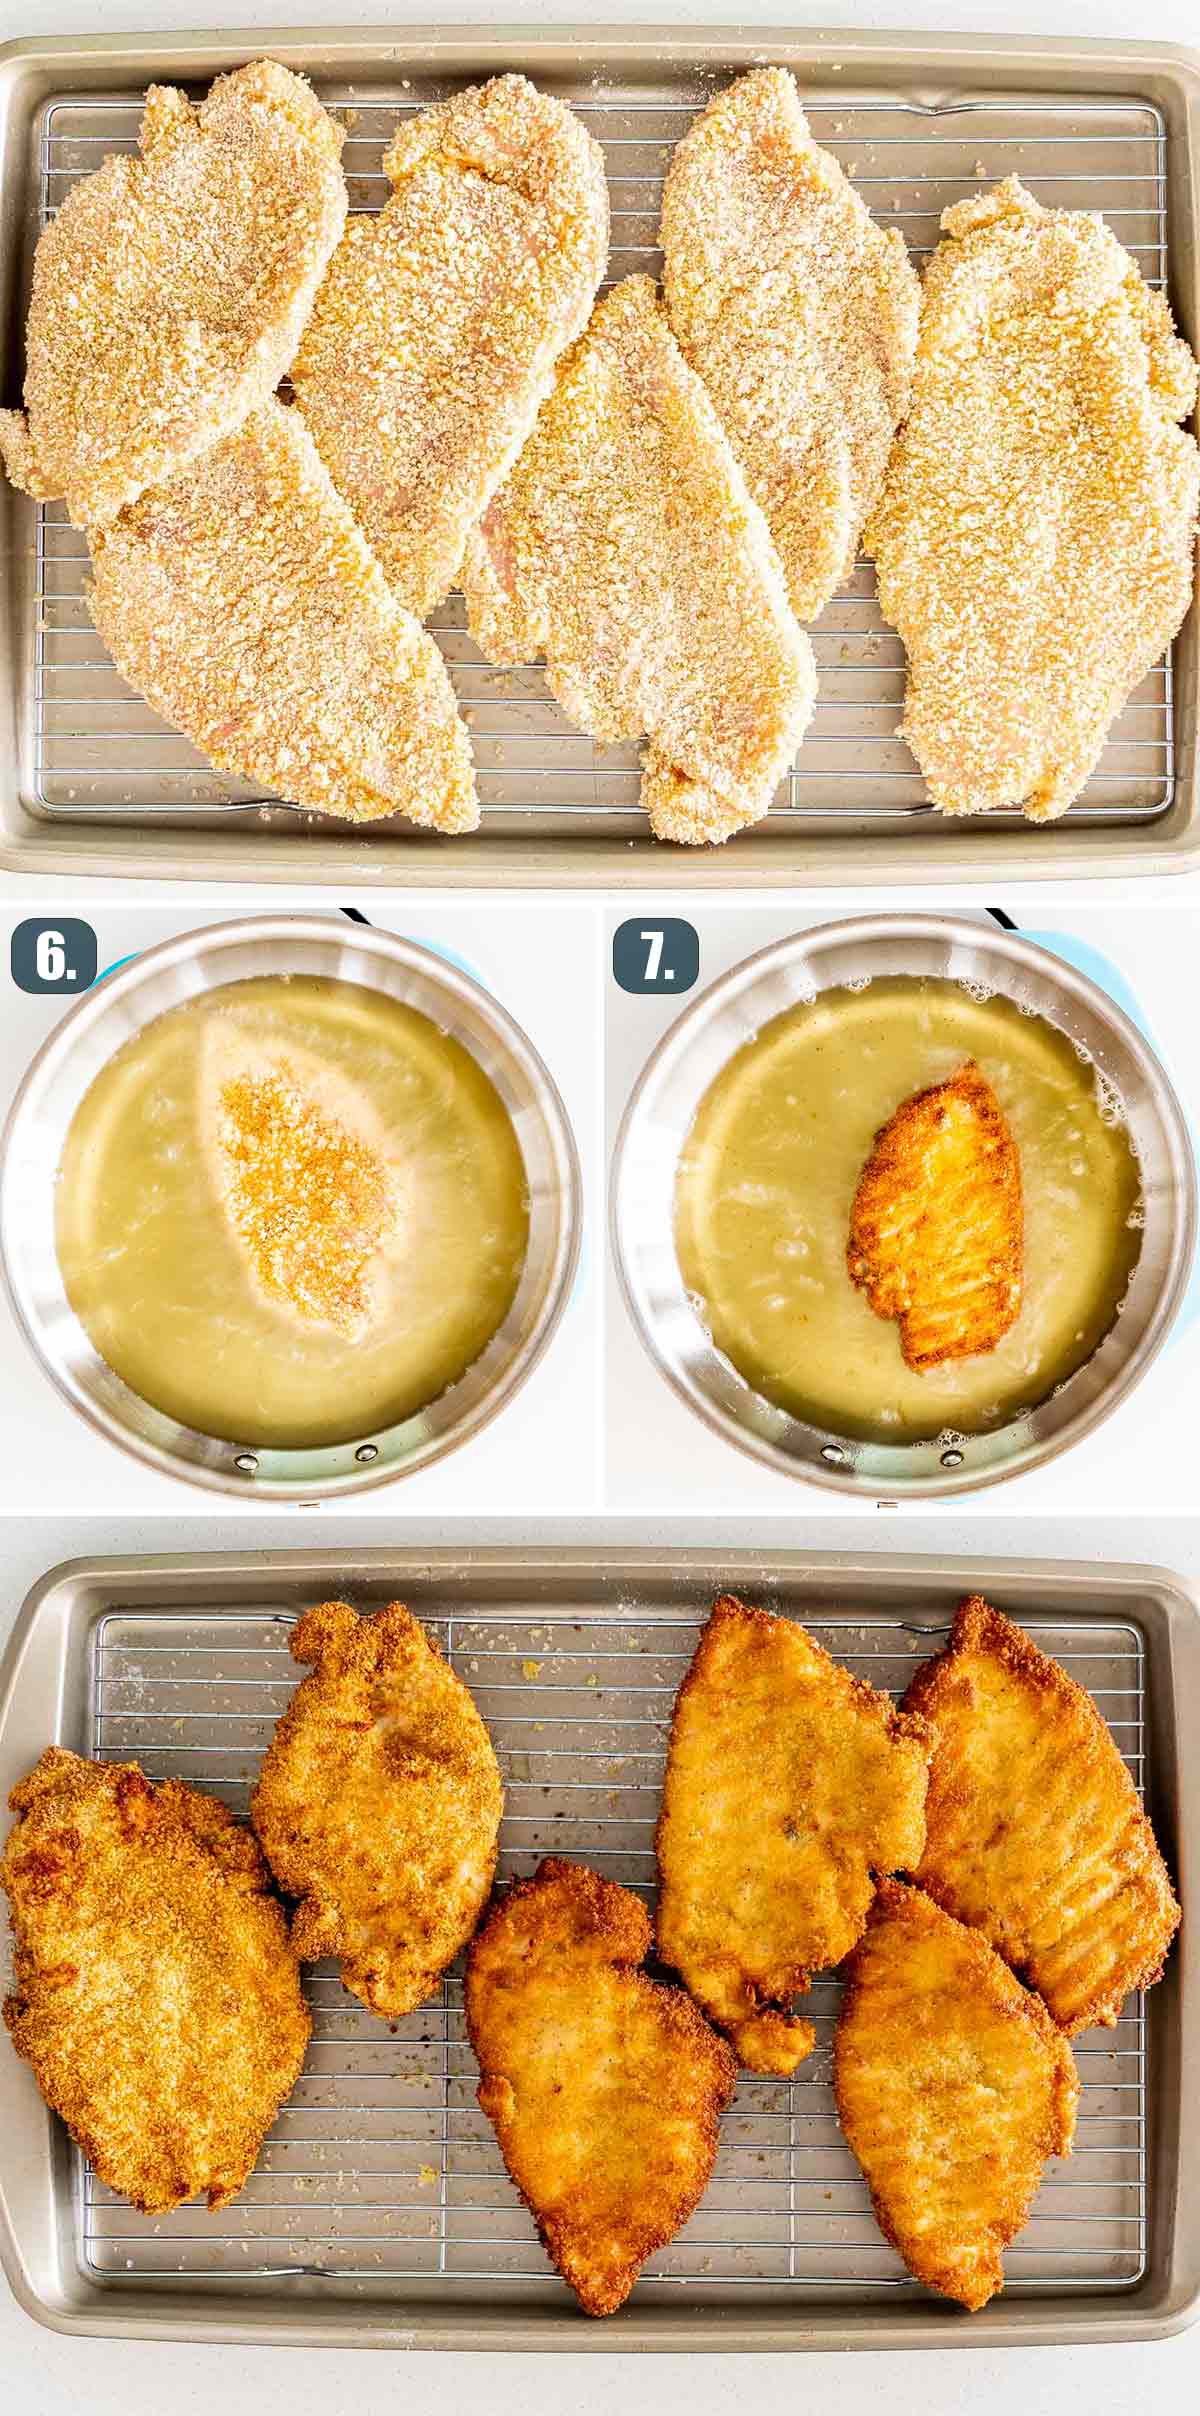 process shots showing how to fry chicken schnitzel.